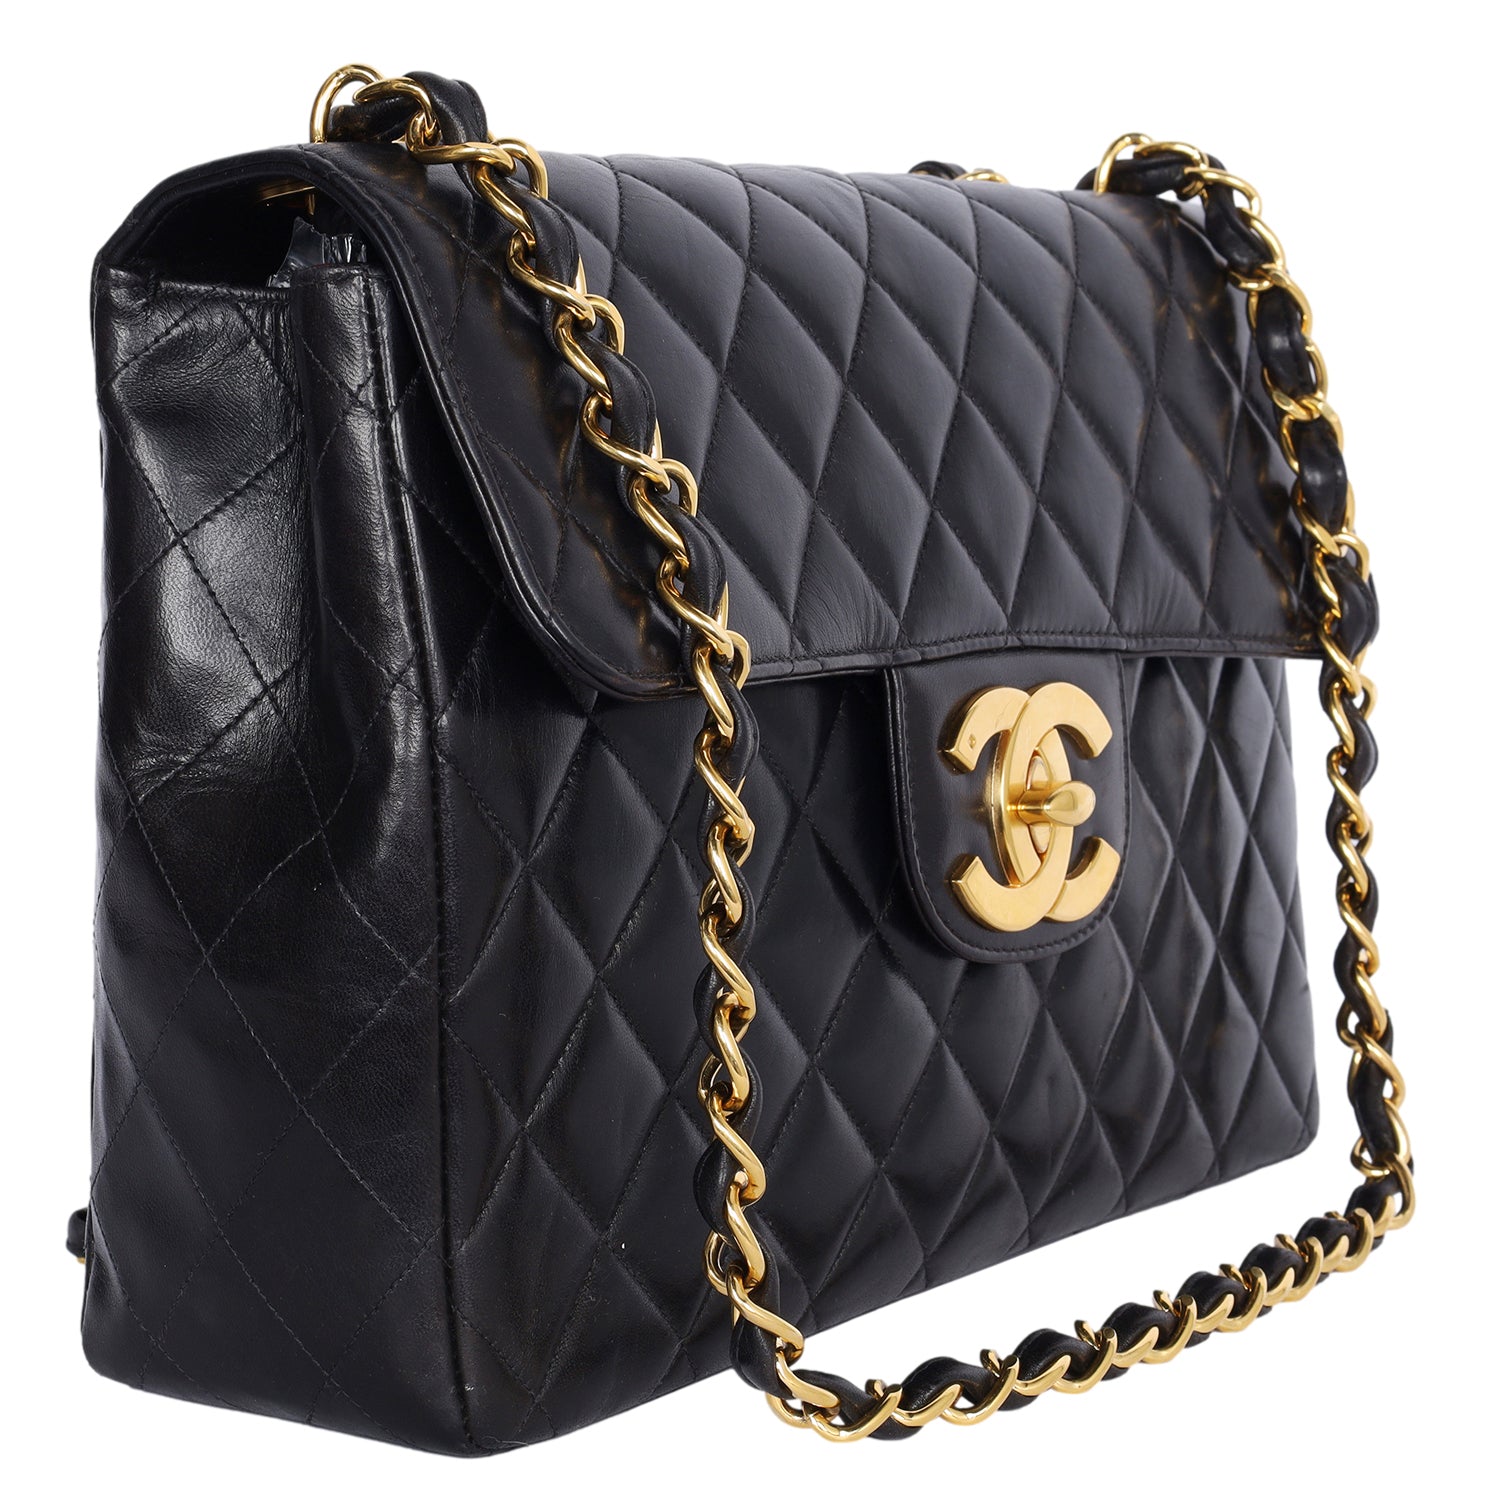 CC Vintage Chanel Black Quilted Jumbo Classic Flap Bag (Authentic Pre-Owned)